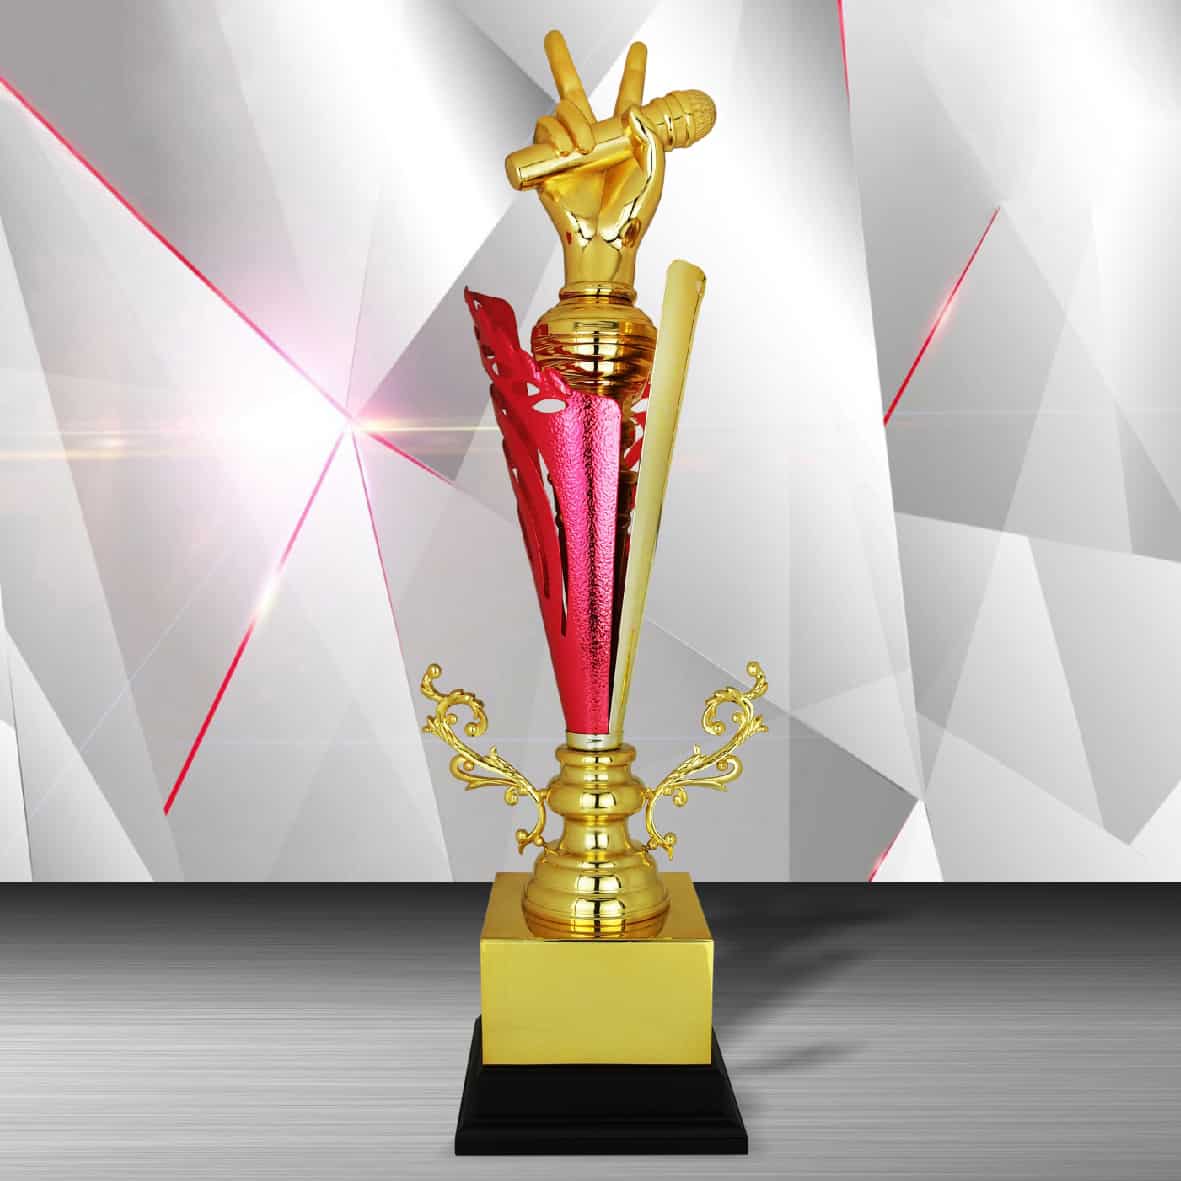 Buy Gold Microphy Trophy at Clazz Trophy Malaysia Supplier